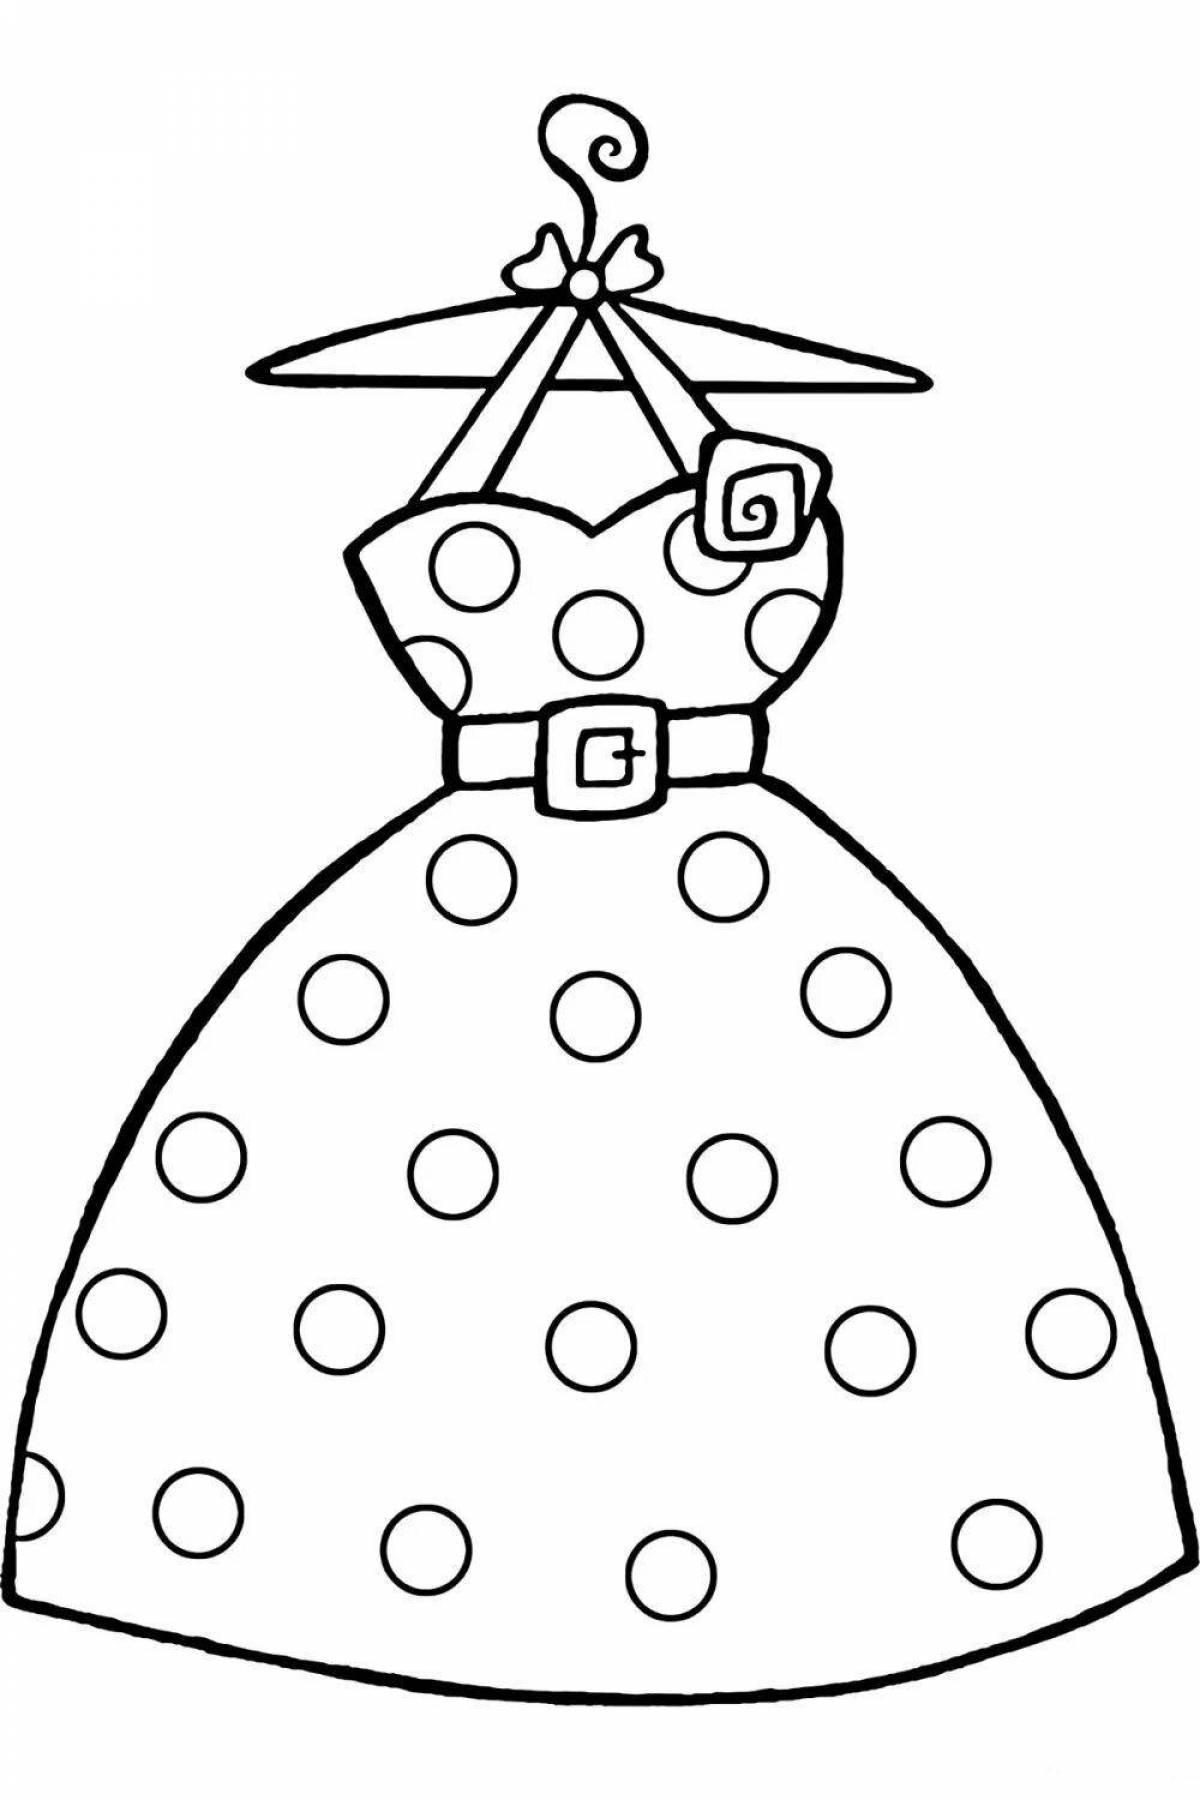 Coloring page fun dress for kids